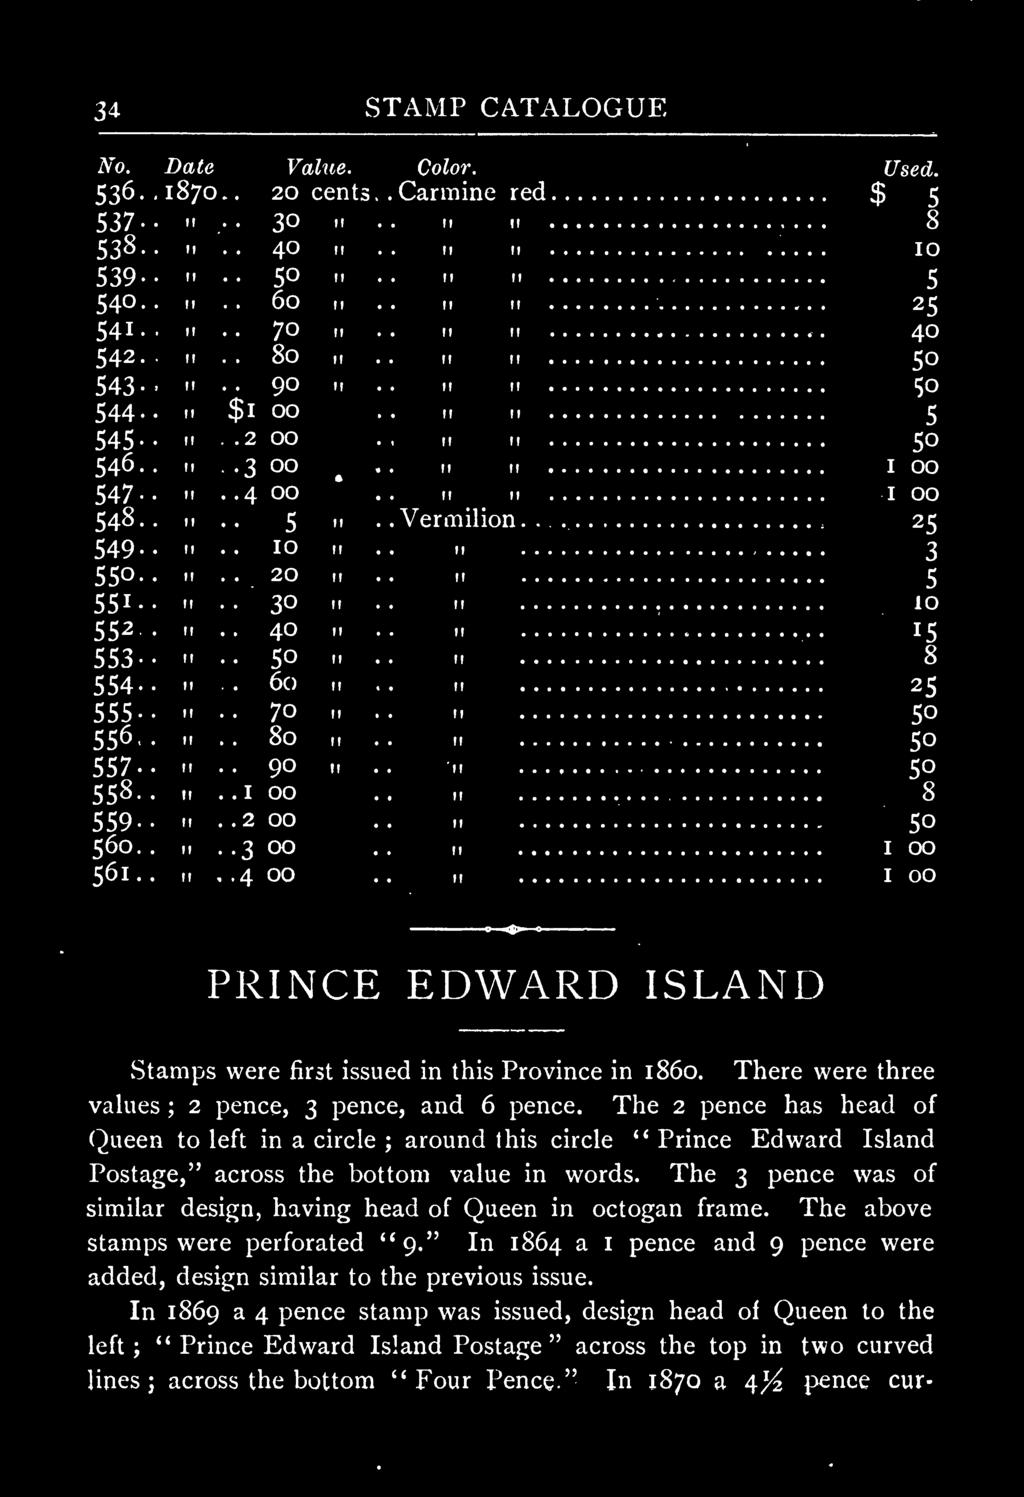 Prince Edward Island Postage," across the bottom value in words The pence was of similar design, having head of Queen in octogan frame The above stamps were perforated "9" In 864 a I pence and 9